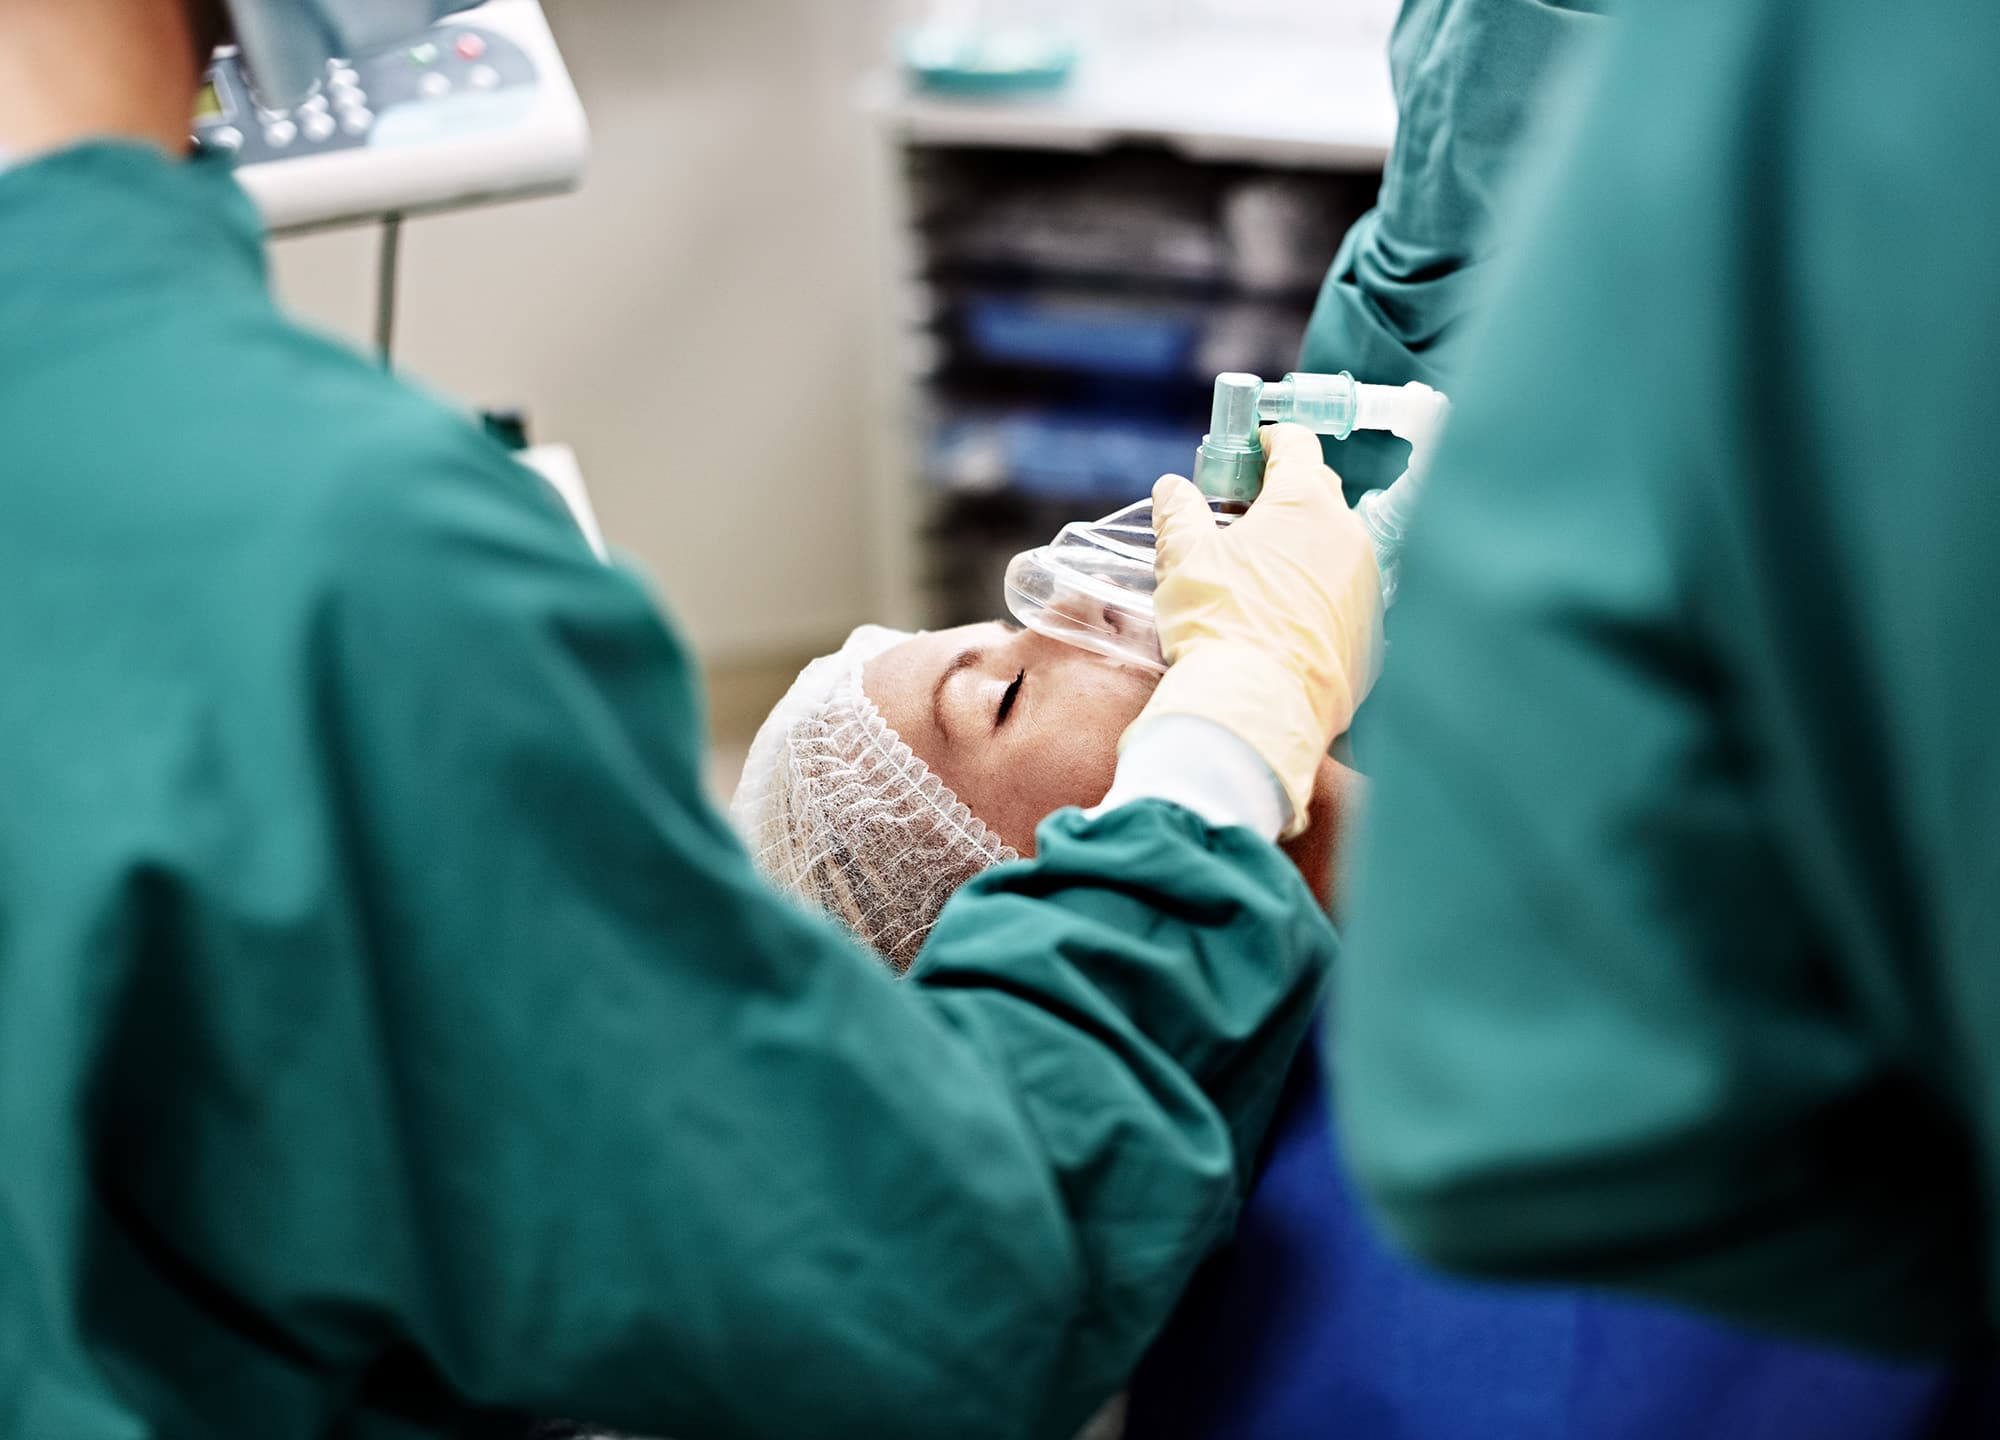 Twilight sedation, also known as conscious sedation or sedation analgesia, is a safe alternative to general anesthesia. Here's what you need to know.